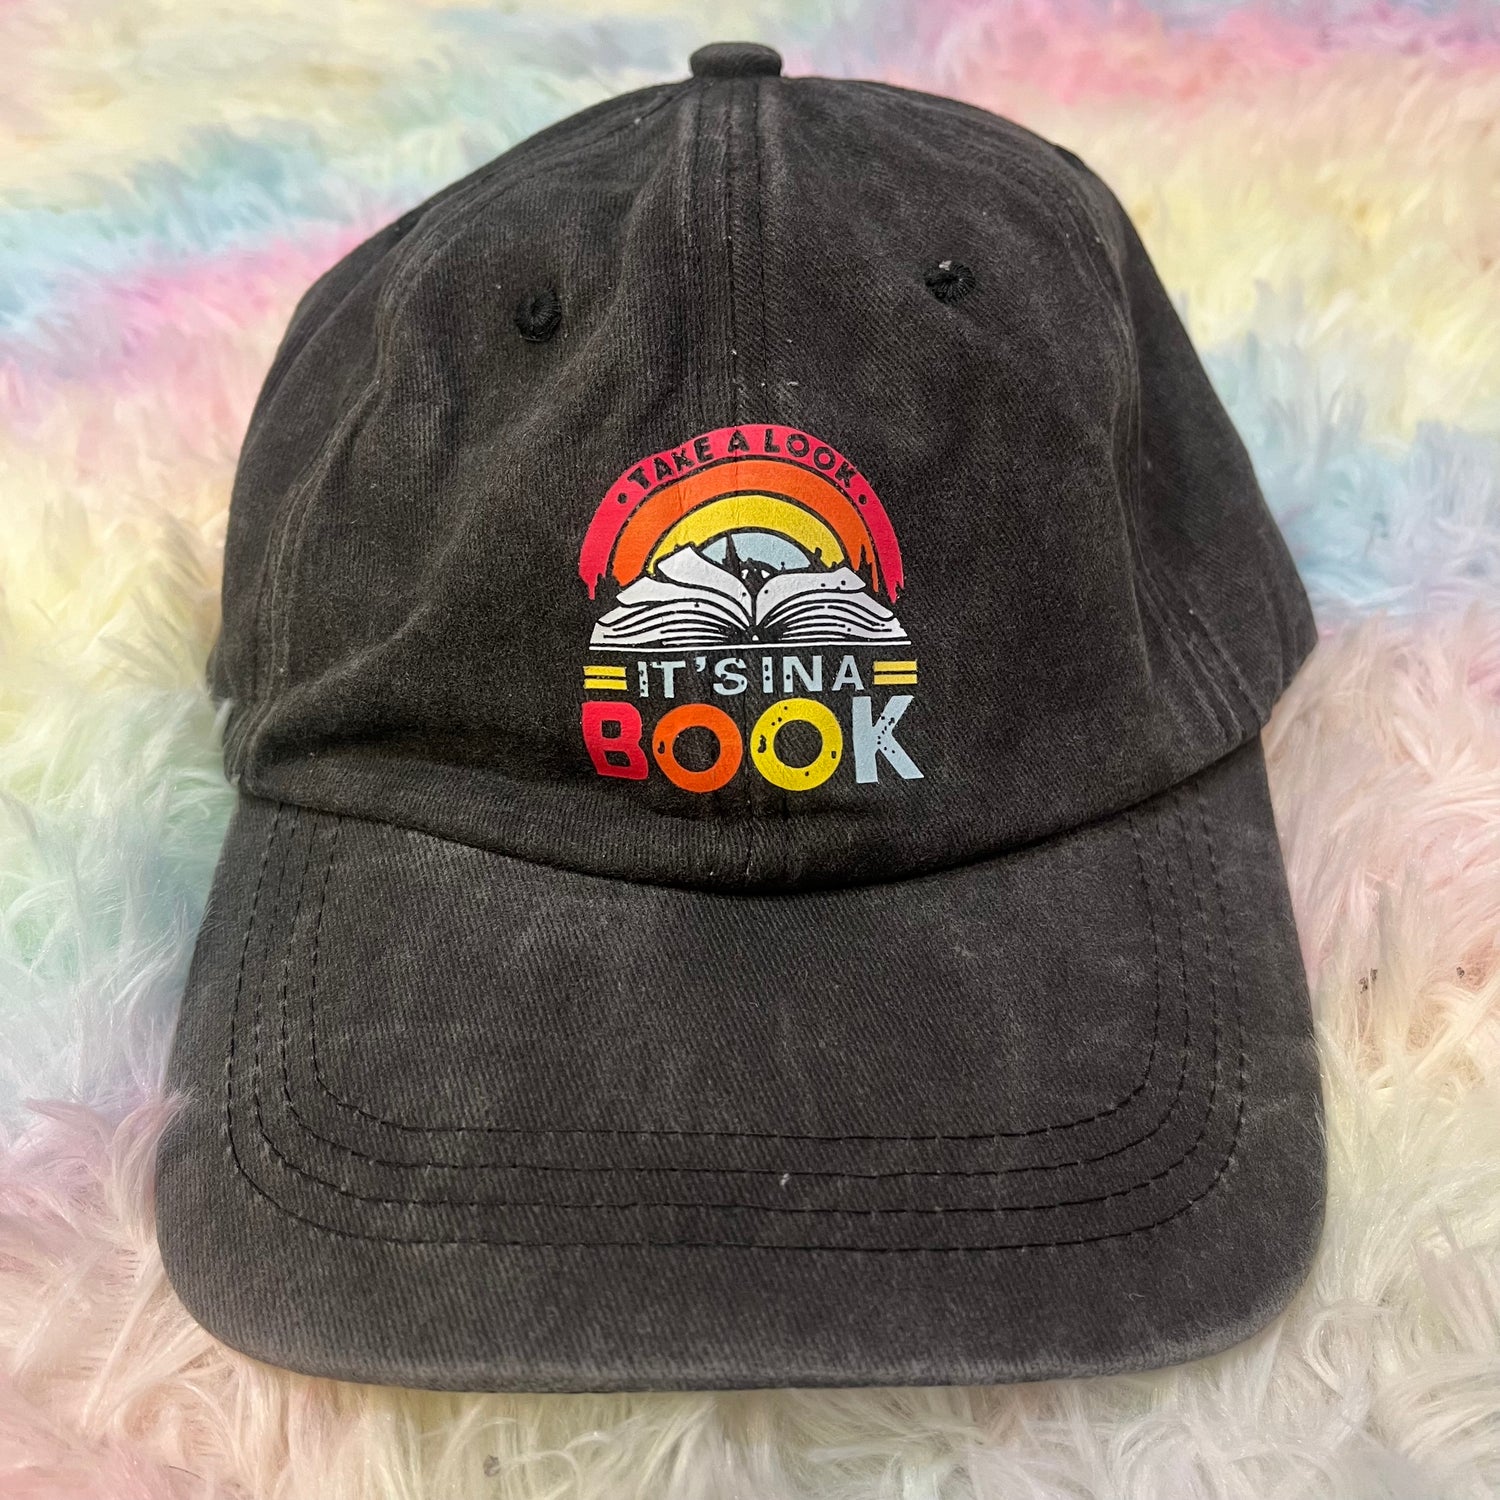 Take a Look It's In a Book Hat - Black Distressed